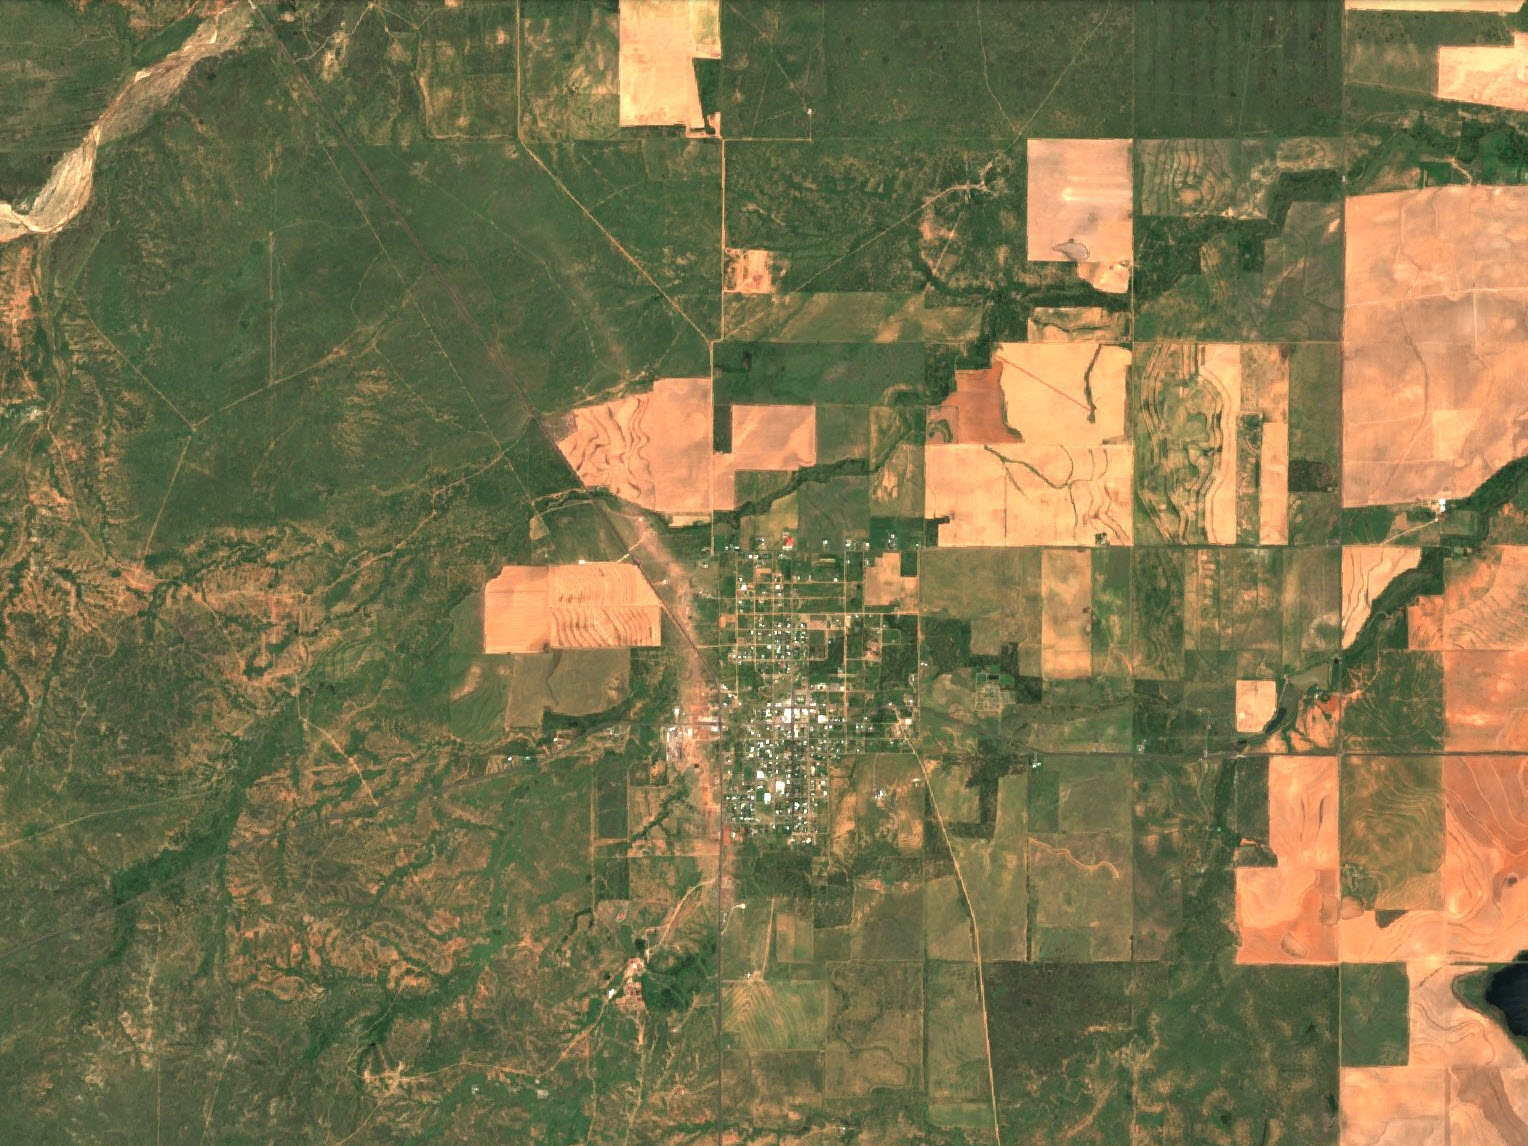 Satellite imagery of the Matador area after the tornado (https://www.sentinel-hub.com/)